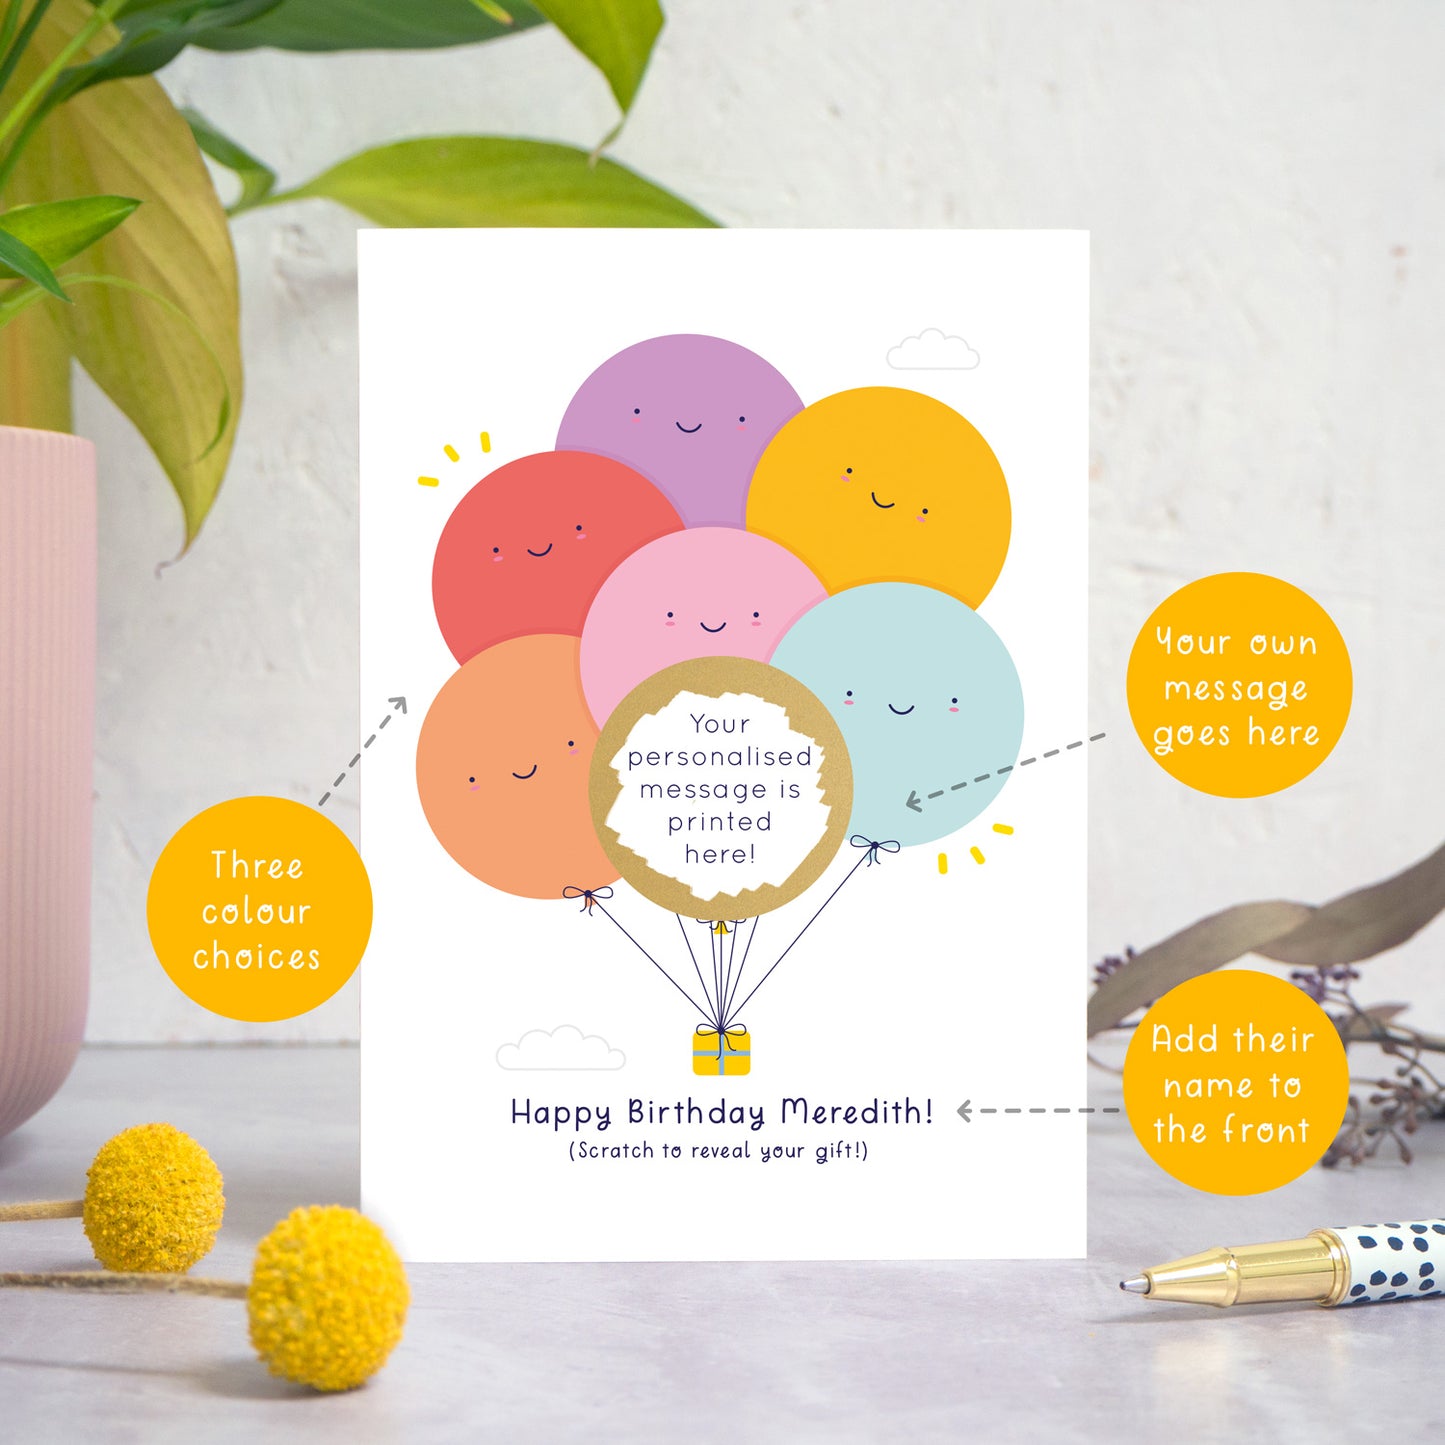 A ‘happy birthday’ scratch card photographed on a white and grey background with a plant on the left and foliage and a pen on the right. This image demonstrates the custom options of the card, eg. the colour of the balloons, the name on the front of the card and the personalised scratch off message.